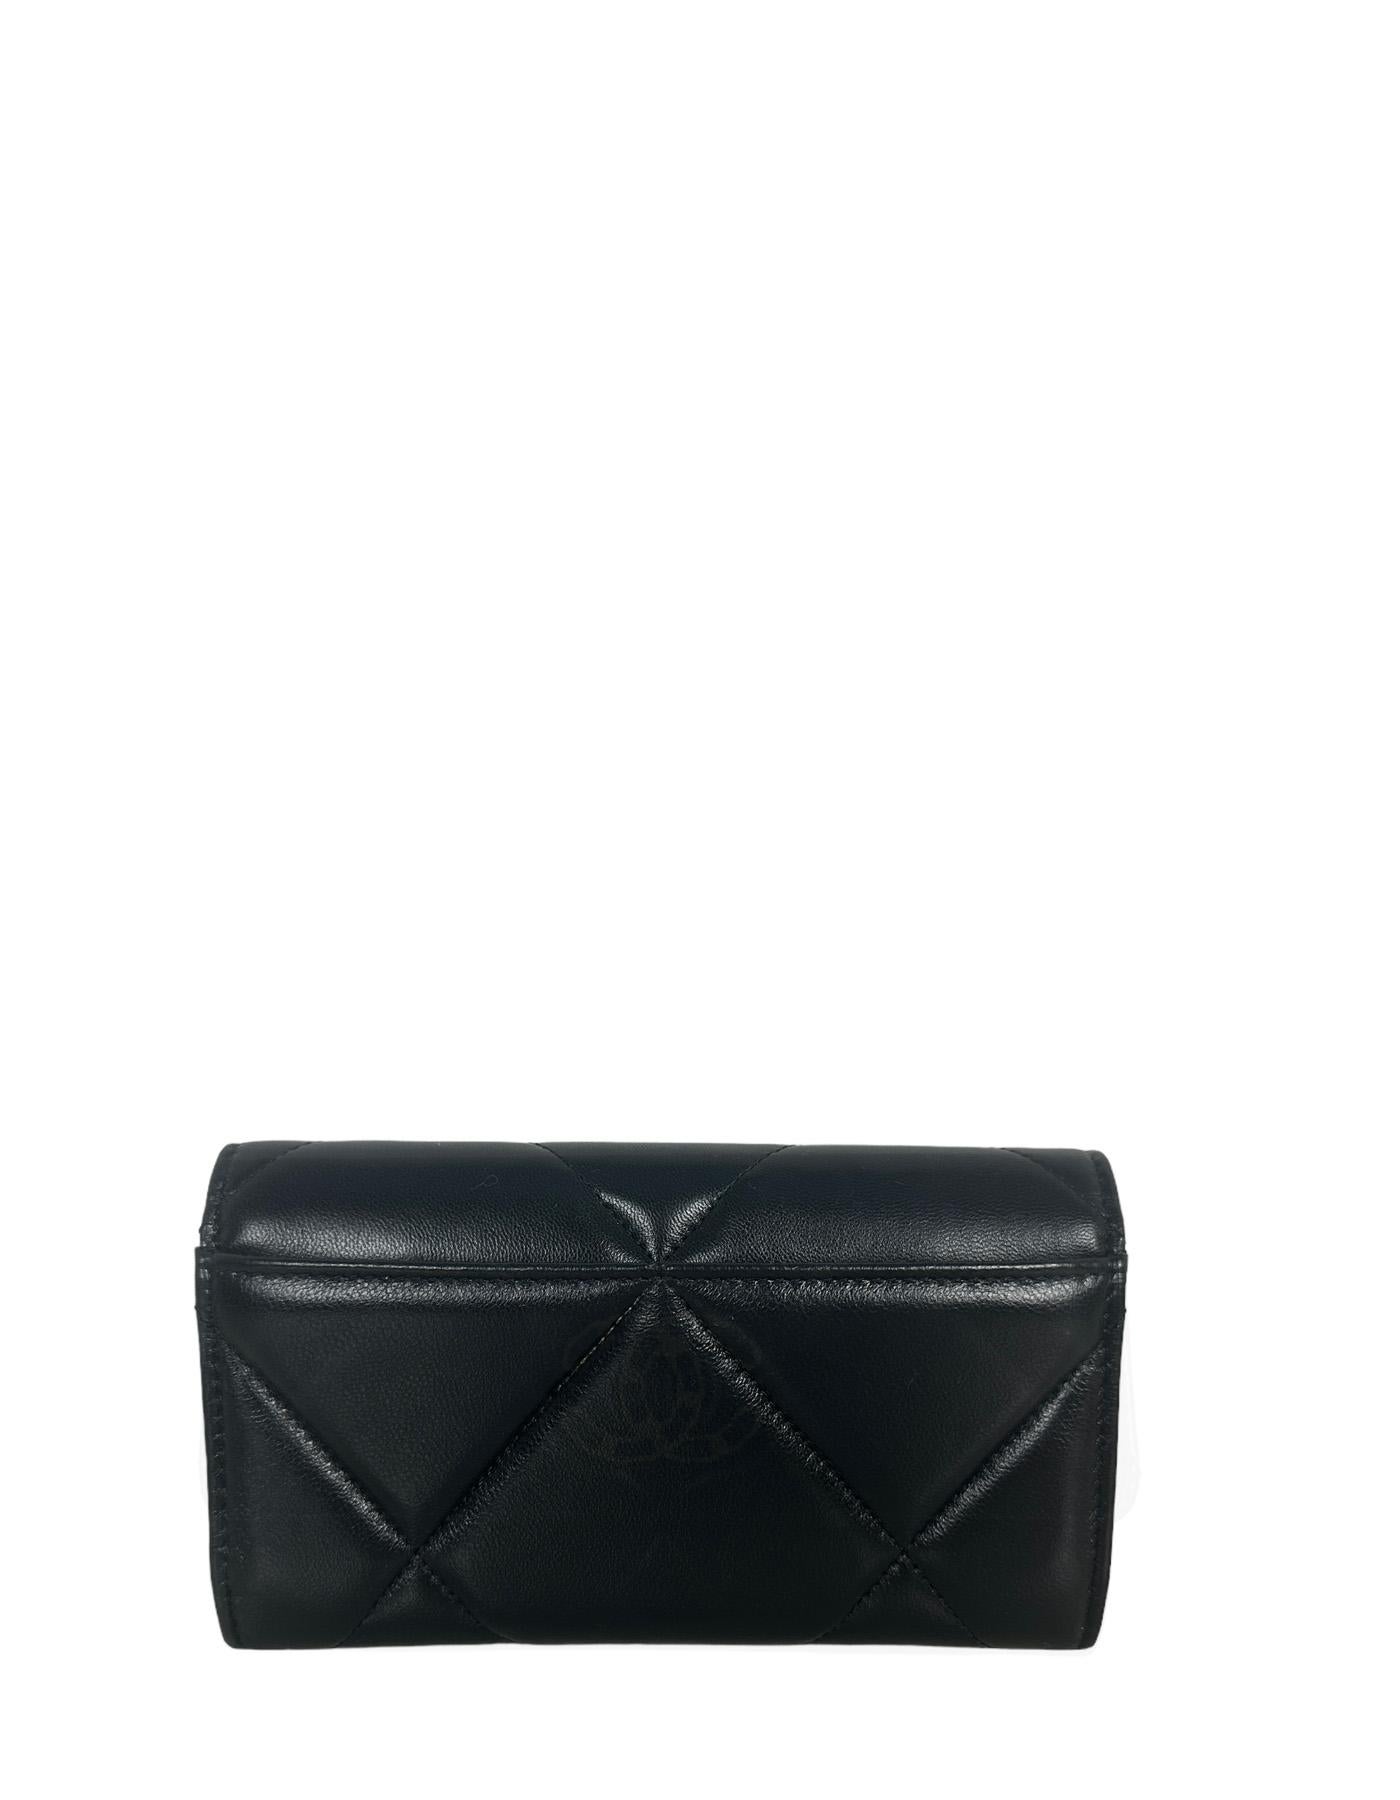 Chanel '23 NEW Black Lambskin Leather Quilted Chanel 19 Flap Wallet

Made In: Spain
Color: Black
Hardware: Goldtone
Materials: Lambskin leather
Lining: Leather and grosgrain
Outer pockets: Back slit
Interior Pockets: Credit card slots and zip coin